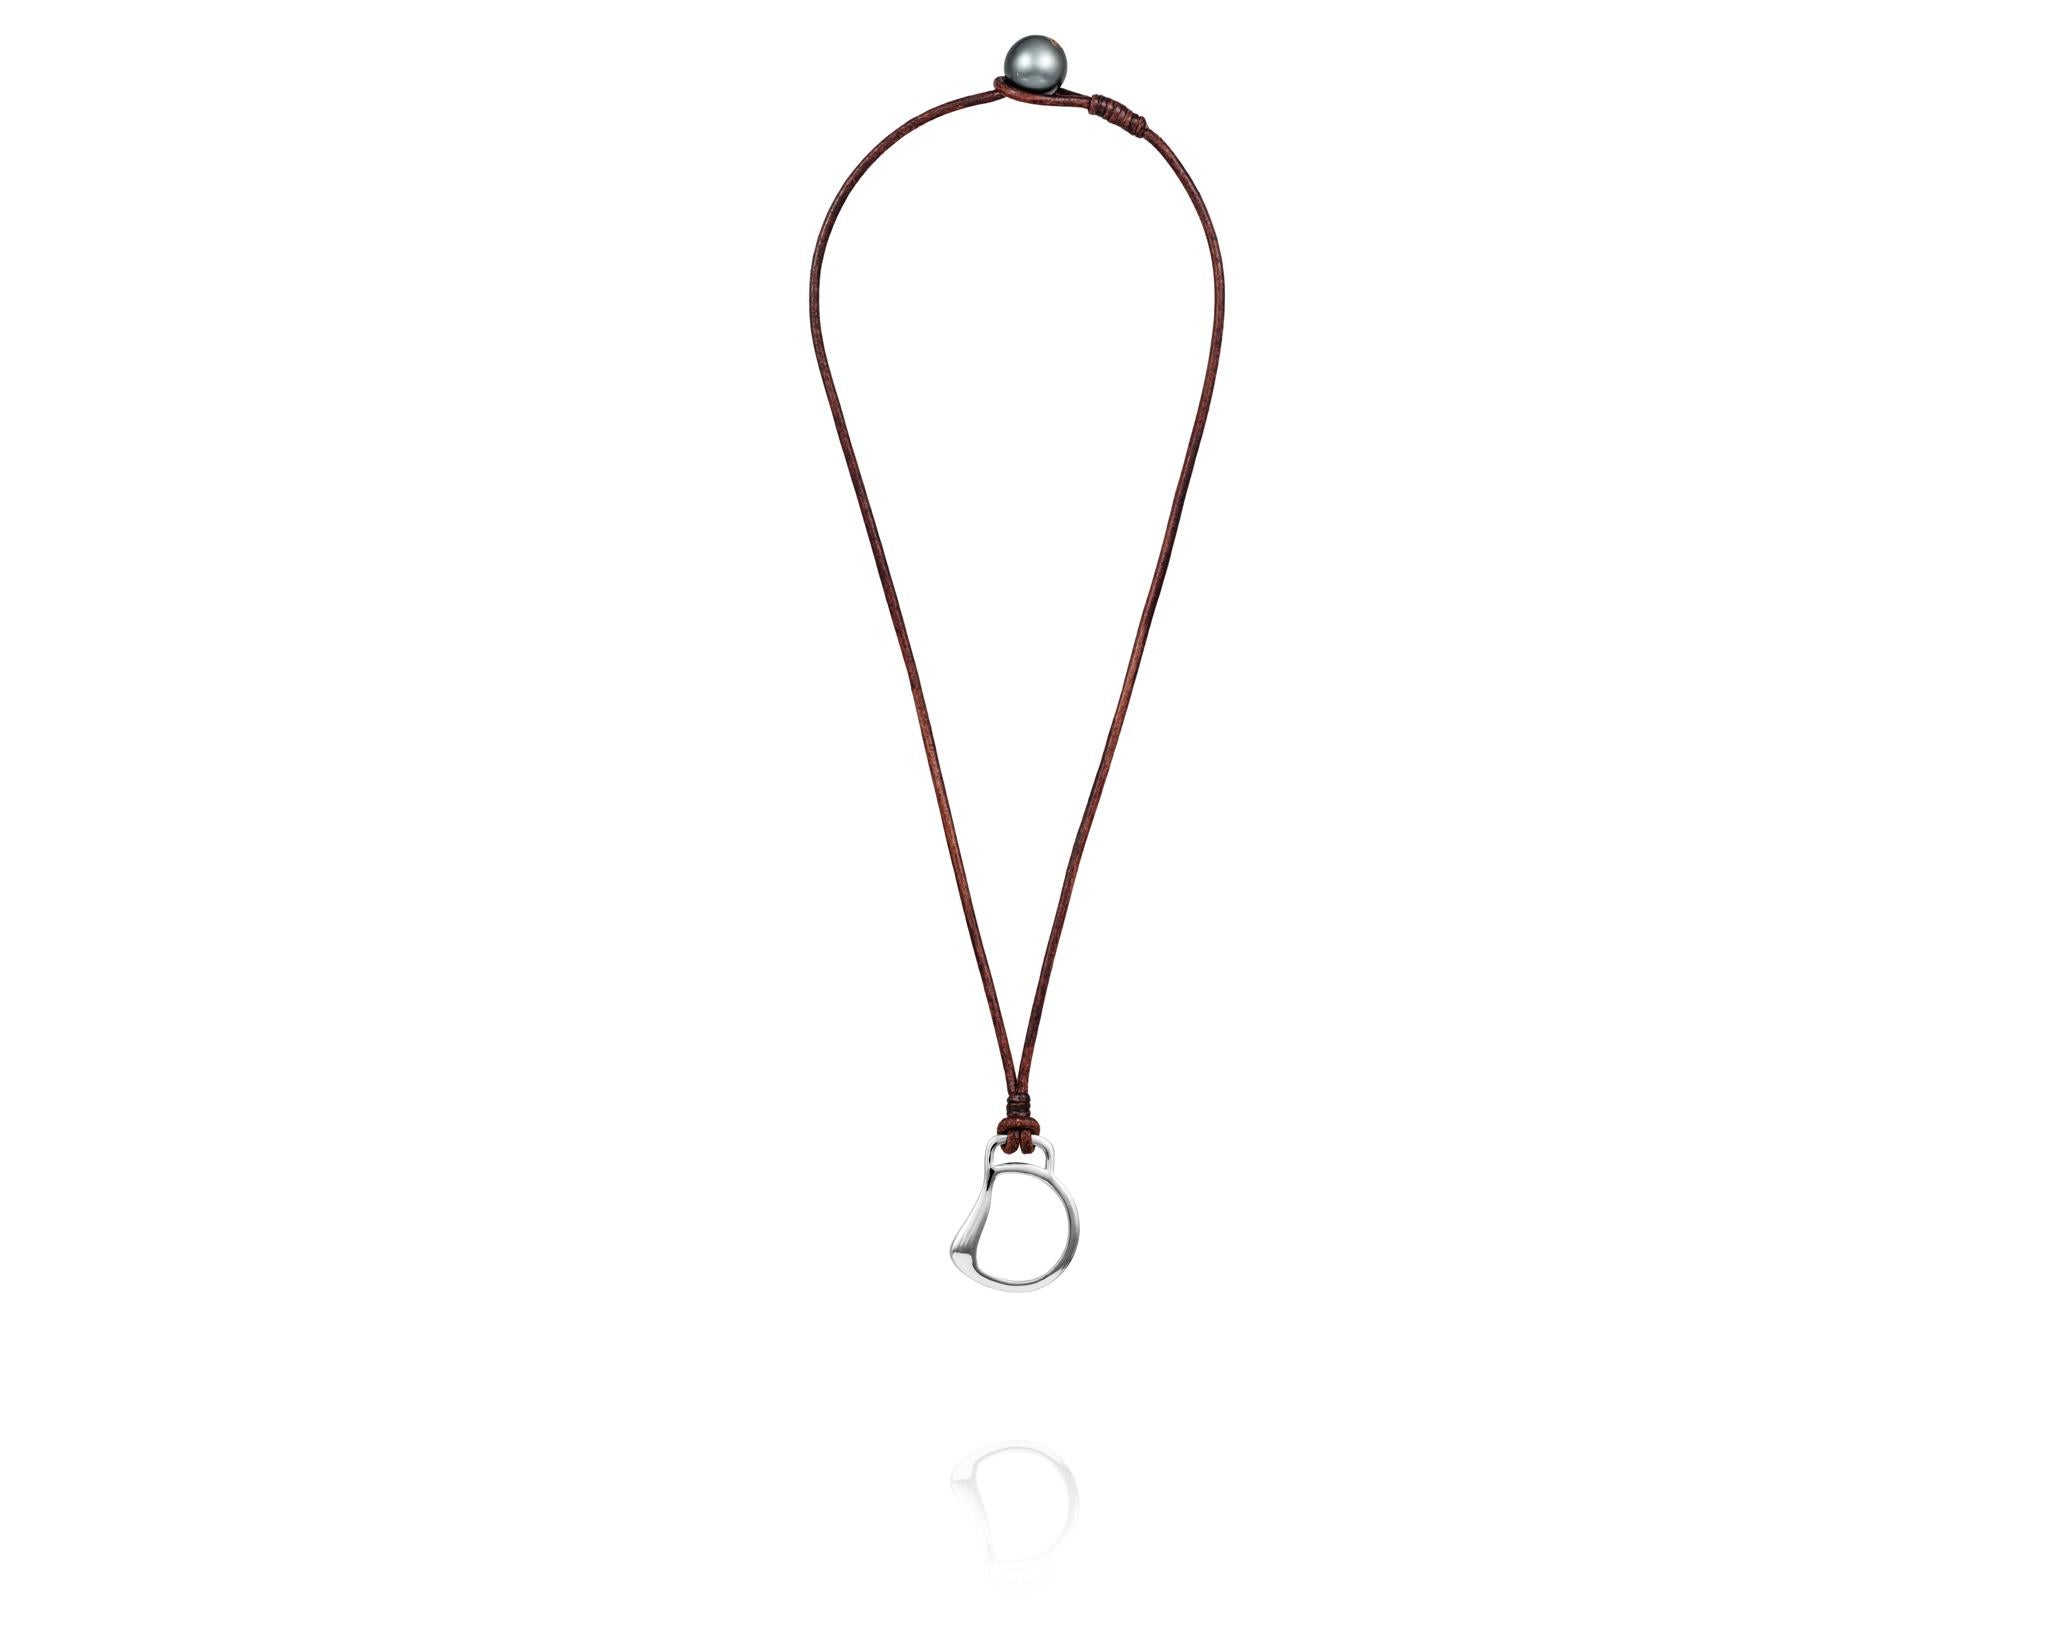 Part of the Vincent Peach Equestrian Collection, the Cheval Bit Necklace has a Sterling Silver Bit Design on a Premium Brown Leather Cord with a luxurious Tahitian Pearl Clasp. The Cheval Bit Necklace comes in the standard 17